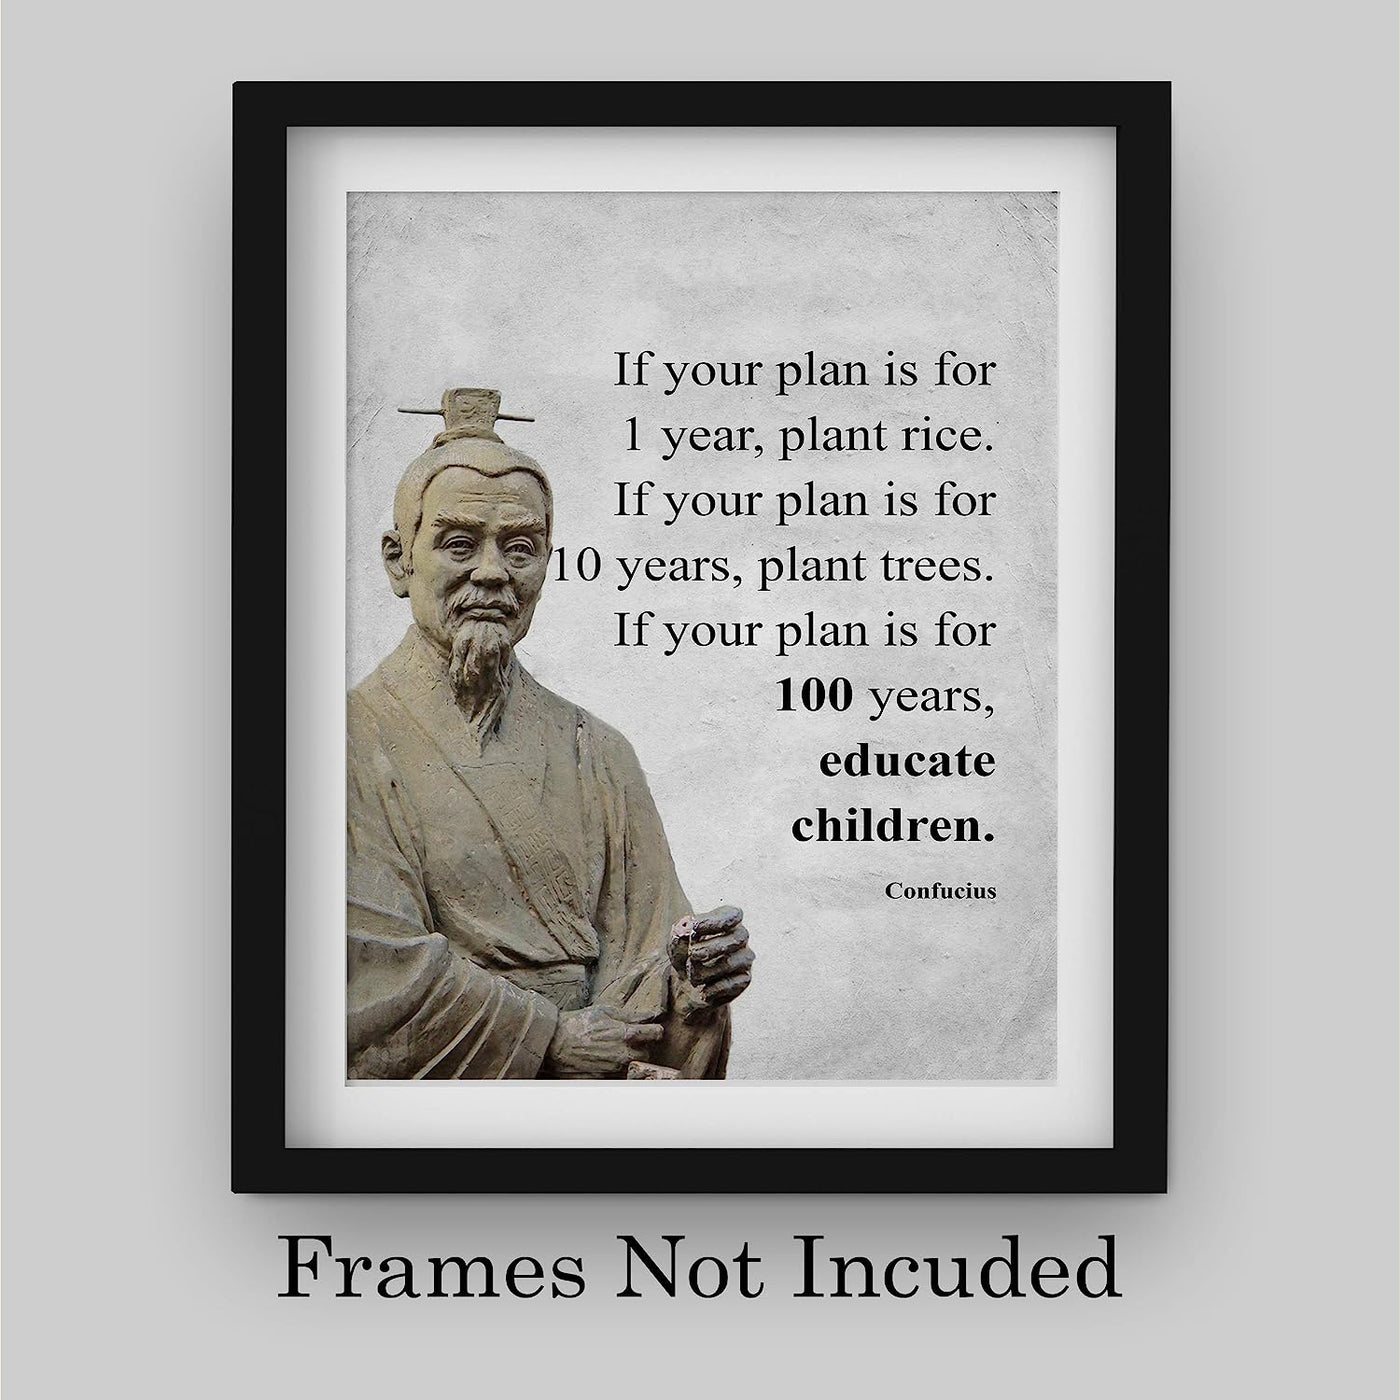 If Your Plan Is For 100 Years-Educate Children Confucius Quotes Wall Art -8 x 10" Motivational Poster Print-Ready to Frame. Inspirational Home-Office-School-Study Decor. Great Gift of Motivation!